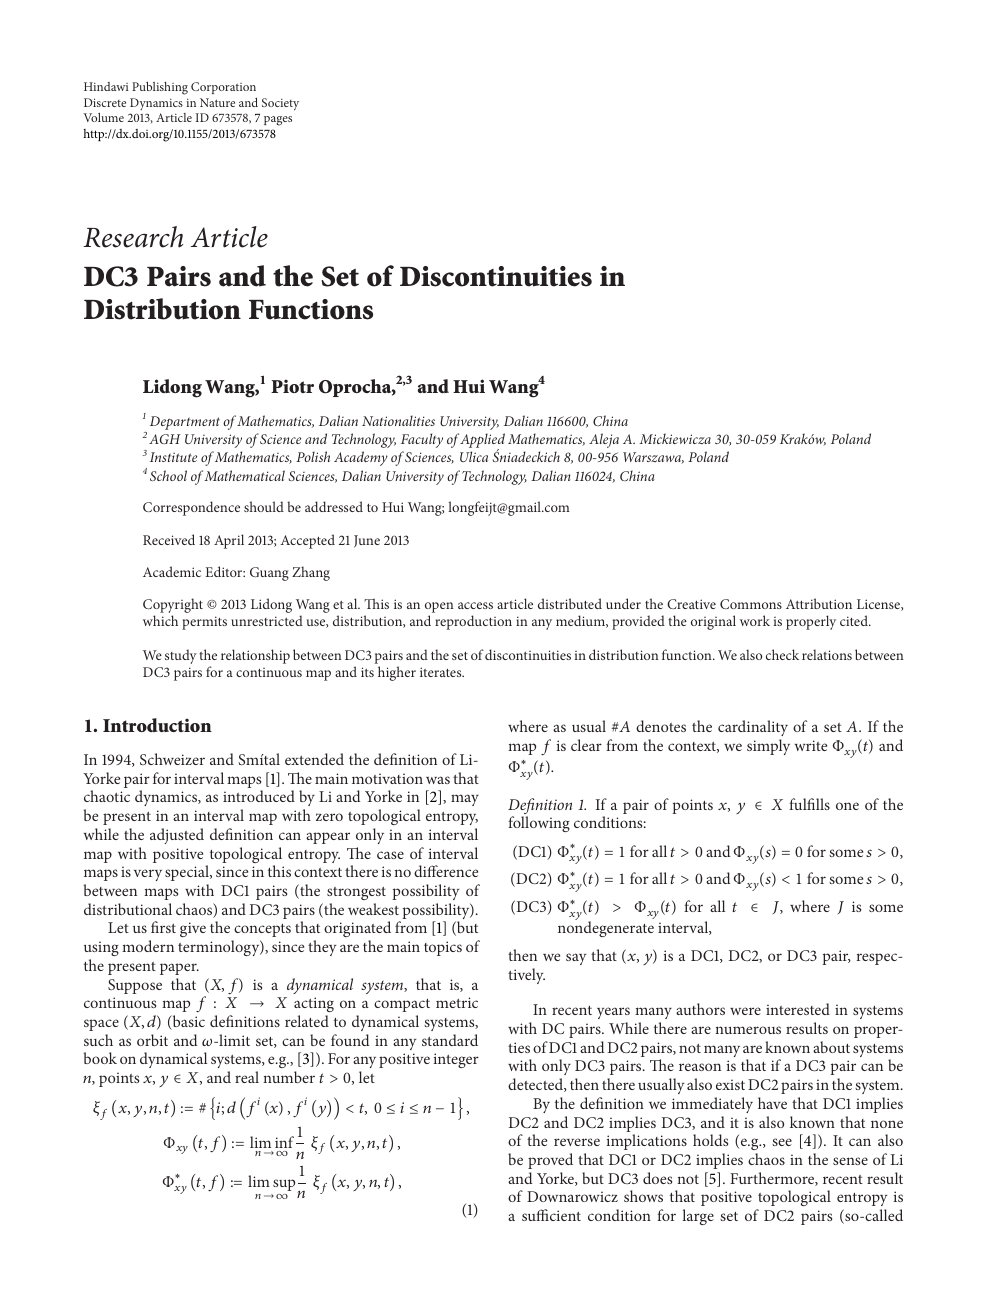 Dc3 Pairs And The Set Of Discontinuities In Distribution Functions Topic Of Research Paper In Mathematics Download Scholarly Article Pdf And Read For Free On Cyberleninka Open Science Hub